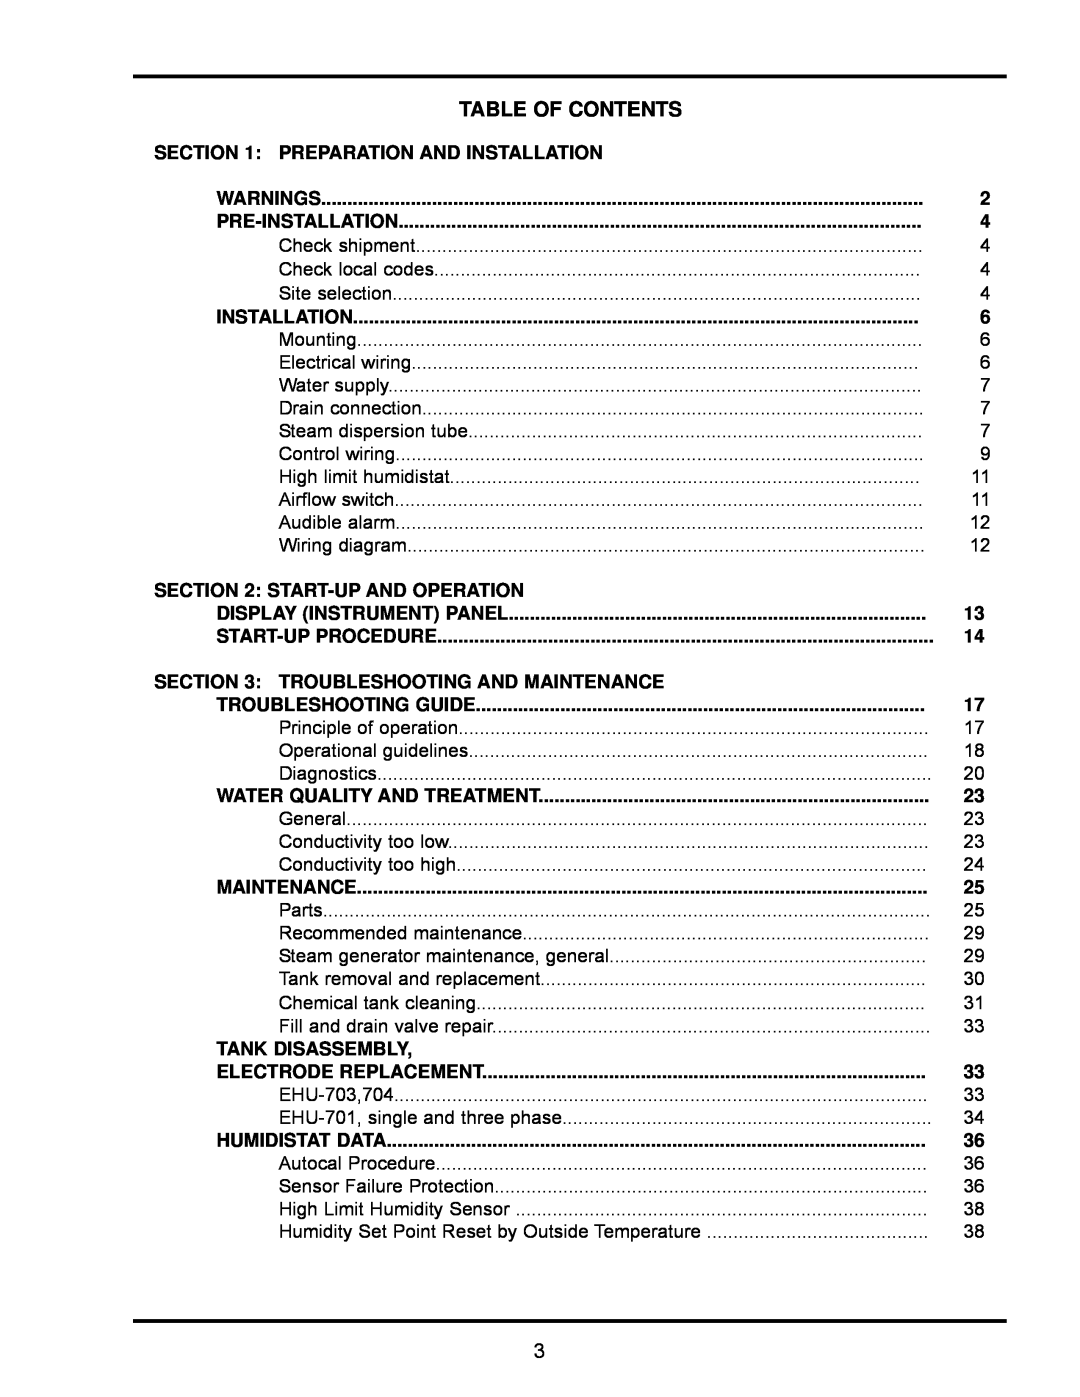 Armstrong World Industries EHU-704, EHU-703 Table Of Contents, Preparation And Installation, Warnings, Pre-Installation 